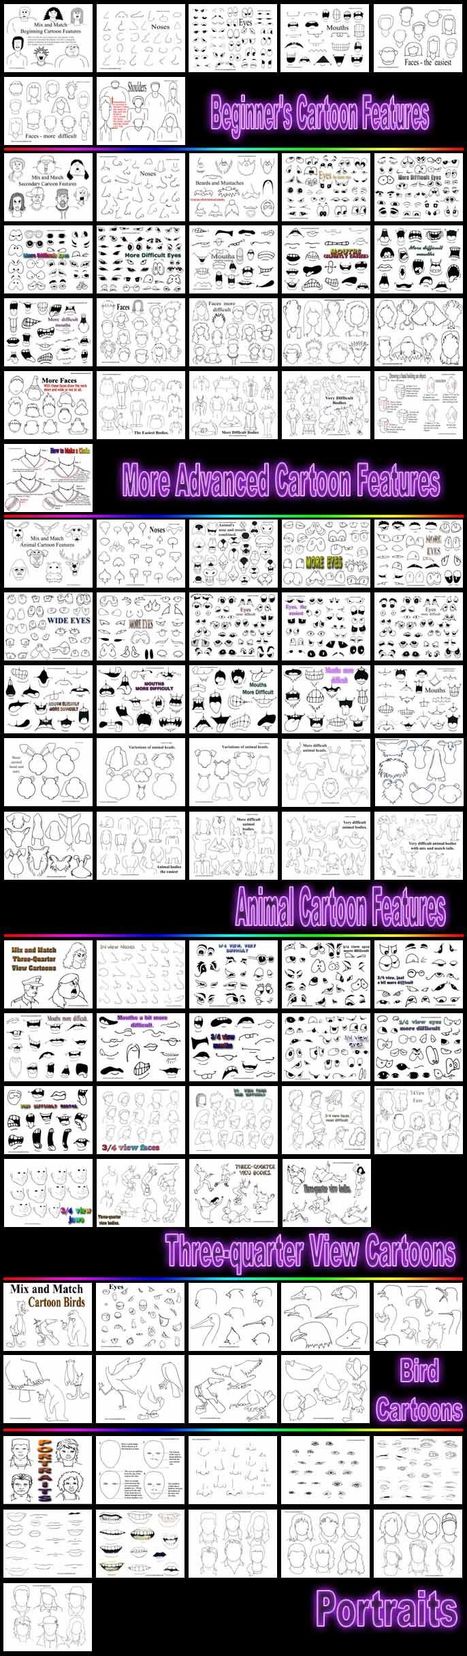 Printable Sheets for Drawing Cartoon Features | Drawing References and Resources | Scoop.it